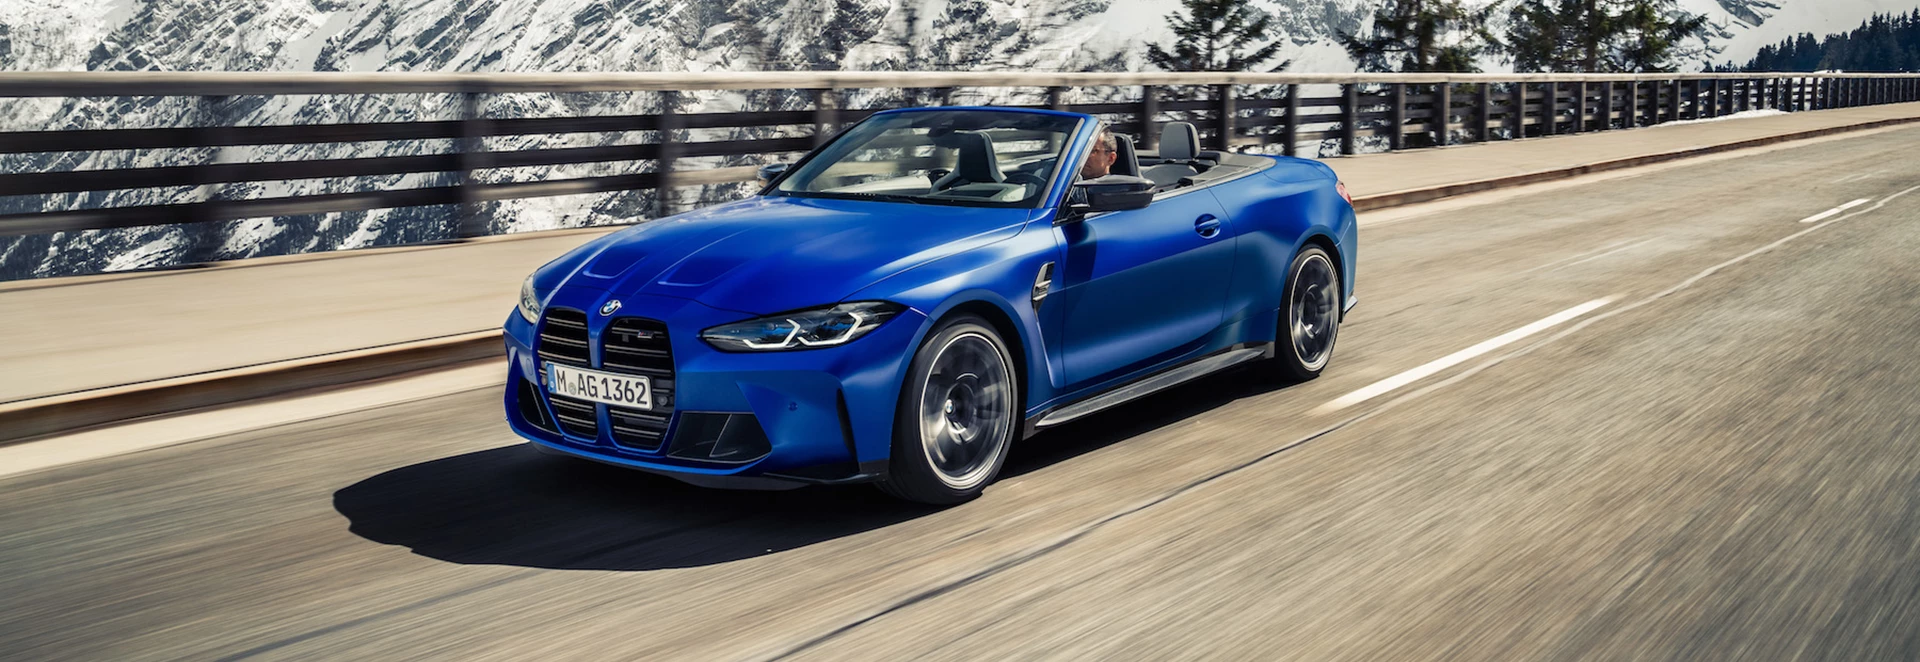 BMW M4 Competition Convertible revealed as new all-weather drop-top 